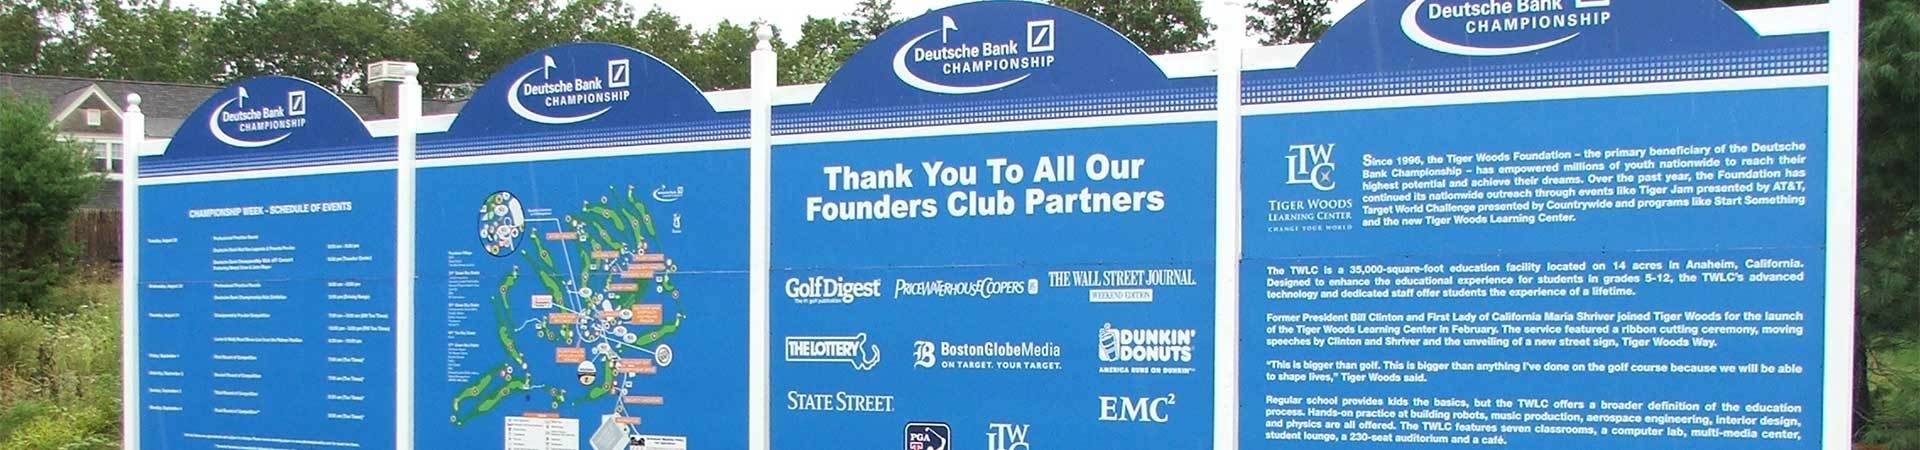 Wayfinding signage at a golf tournament featuring course information and sponsor logos.